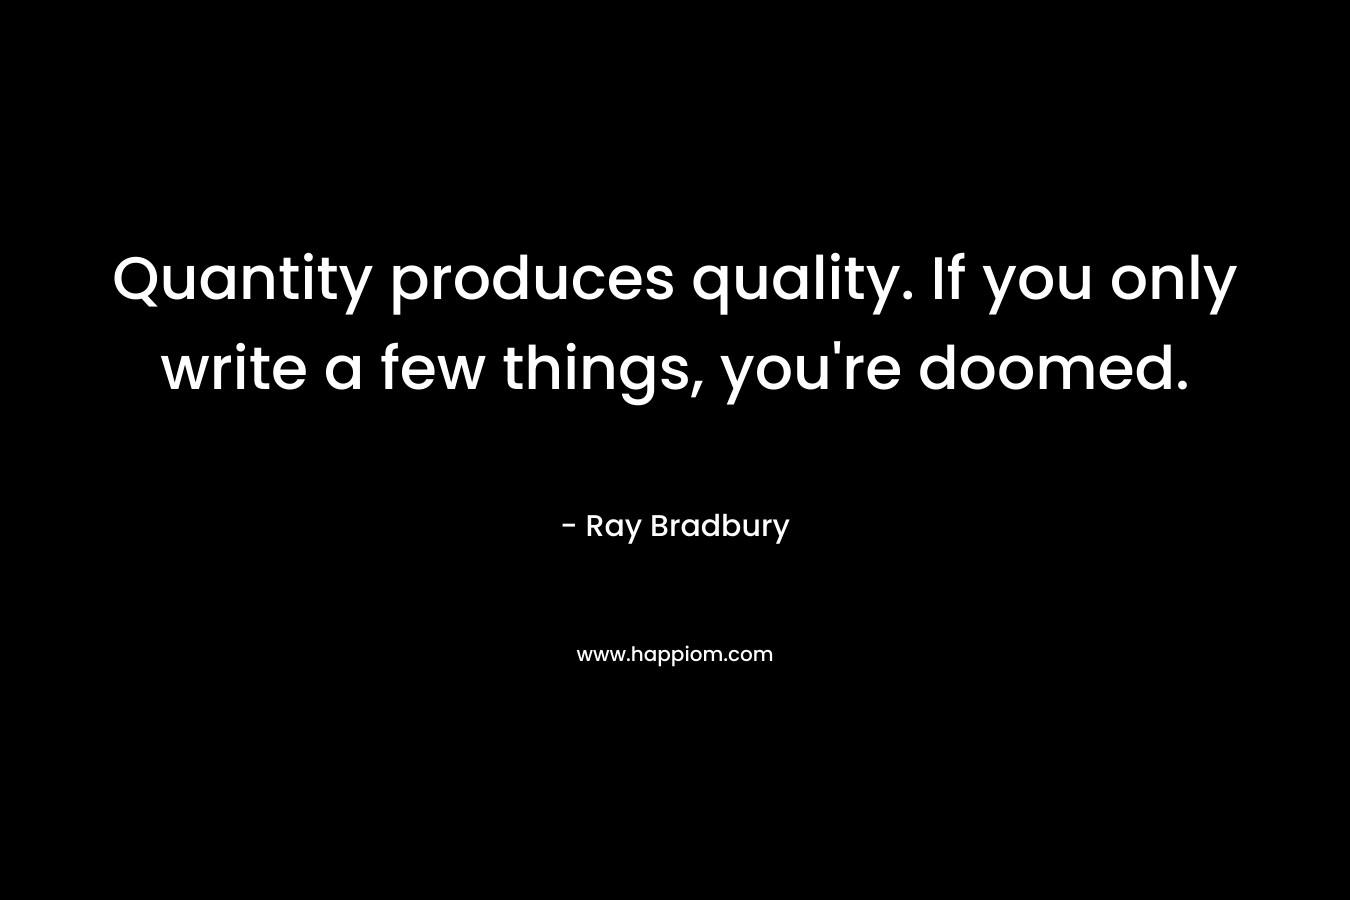 Quantity produces quality. If you only write a few things, you’re doomed. – Ray Bradbury